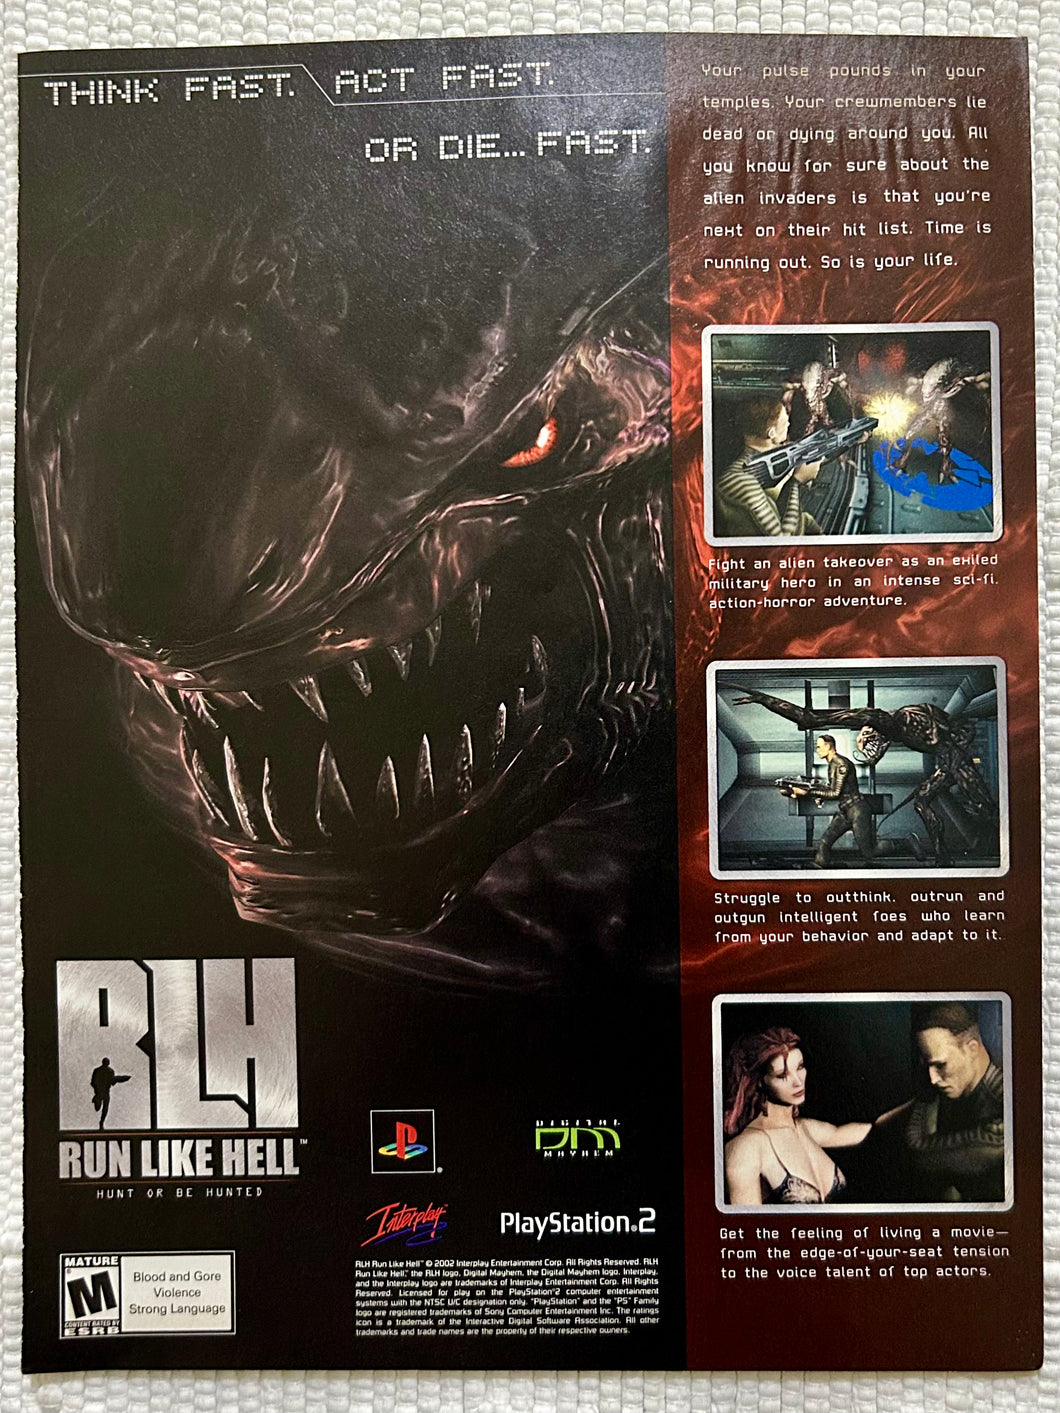 Run Like Hell - PS2 - Original Vintage Advertisement - Print Ads - Laminated A4 Poster